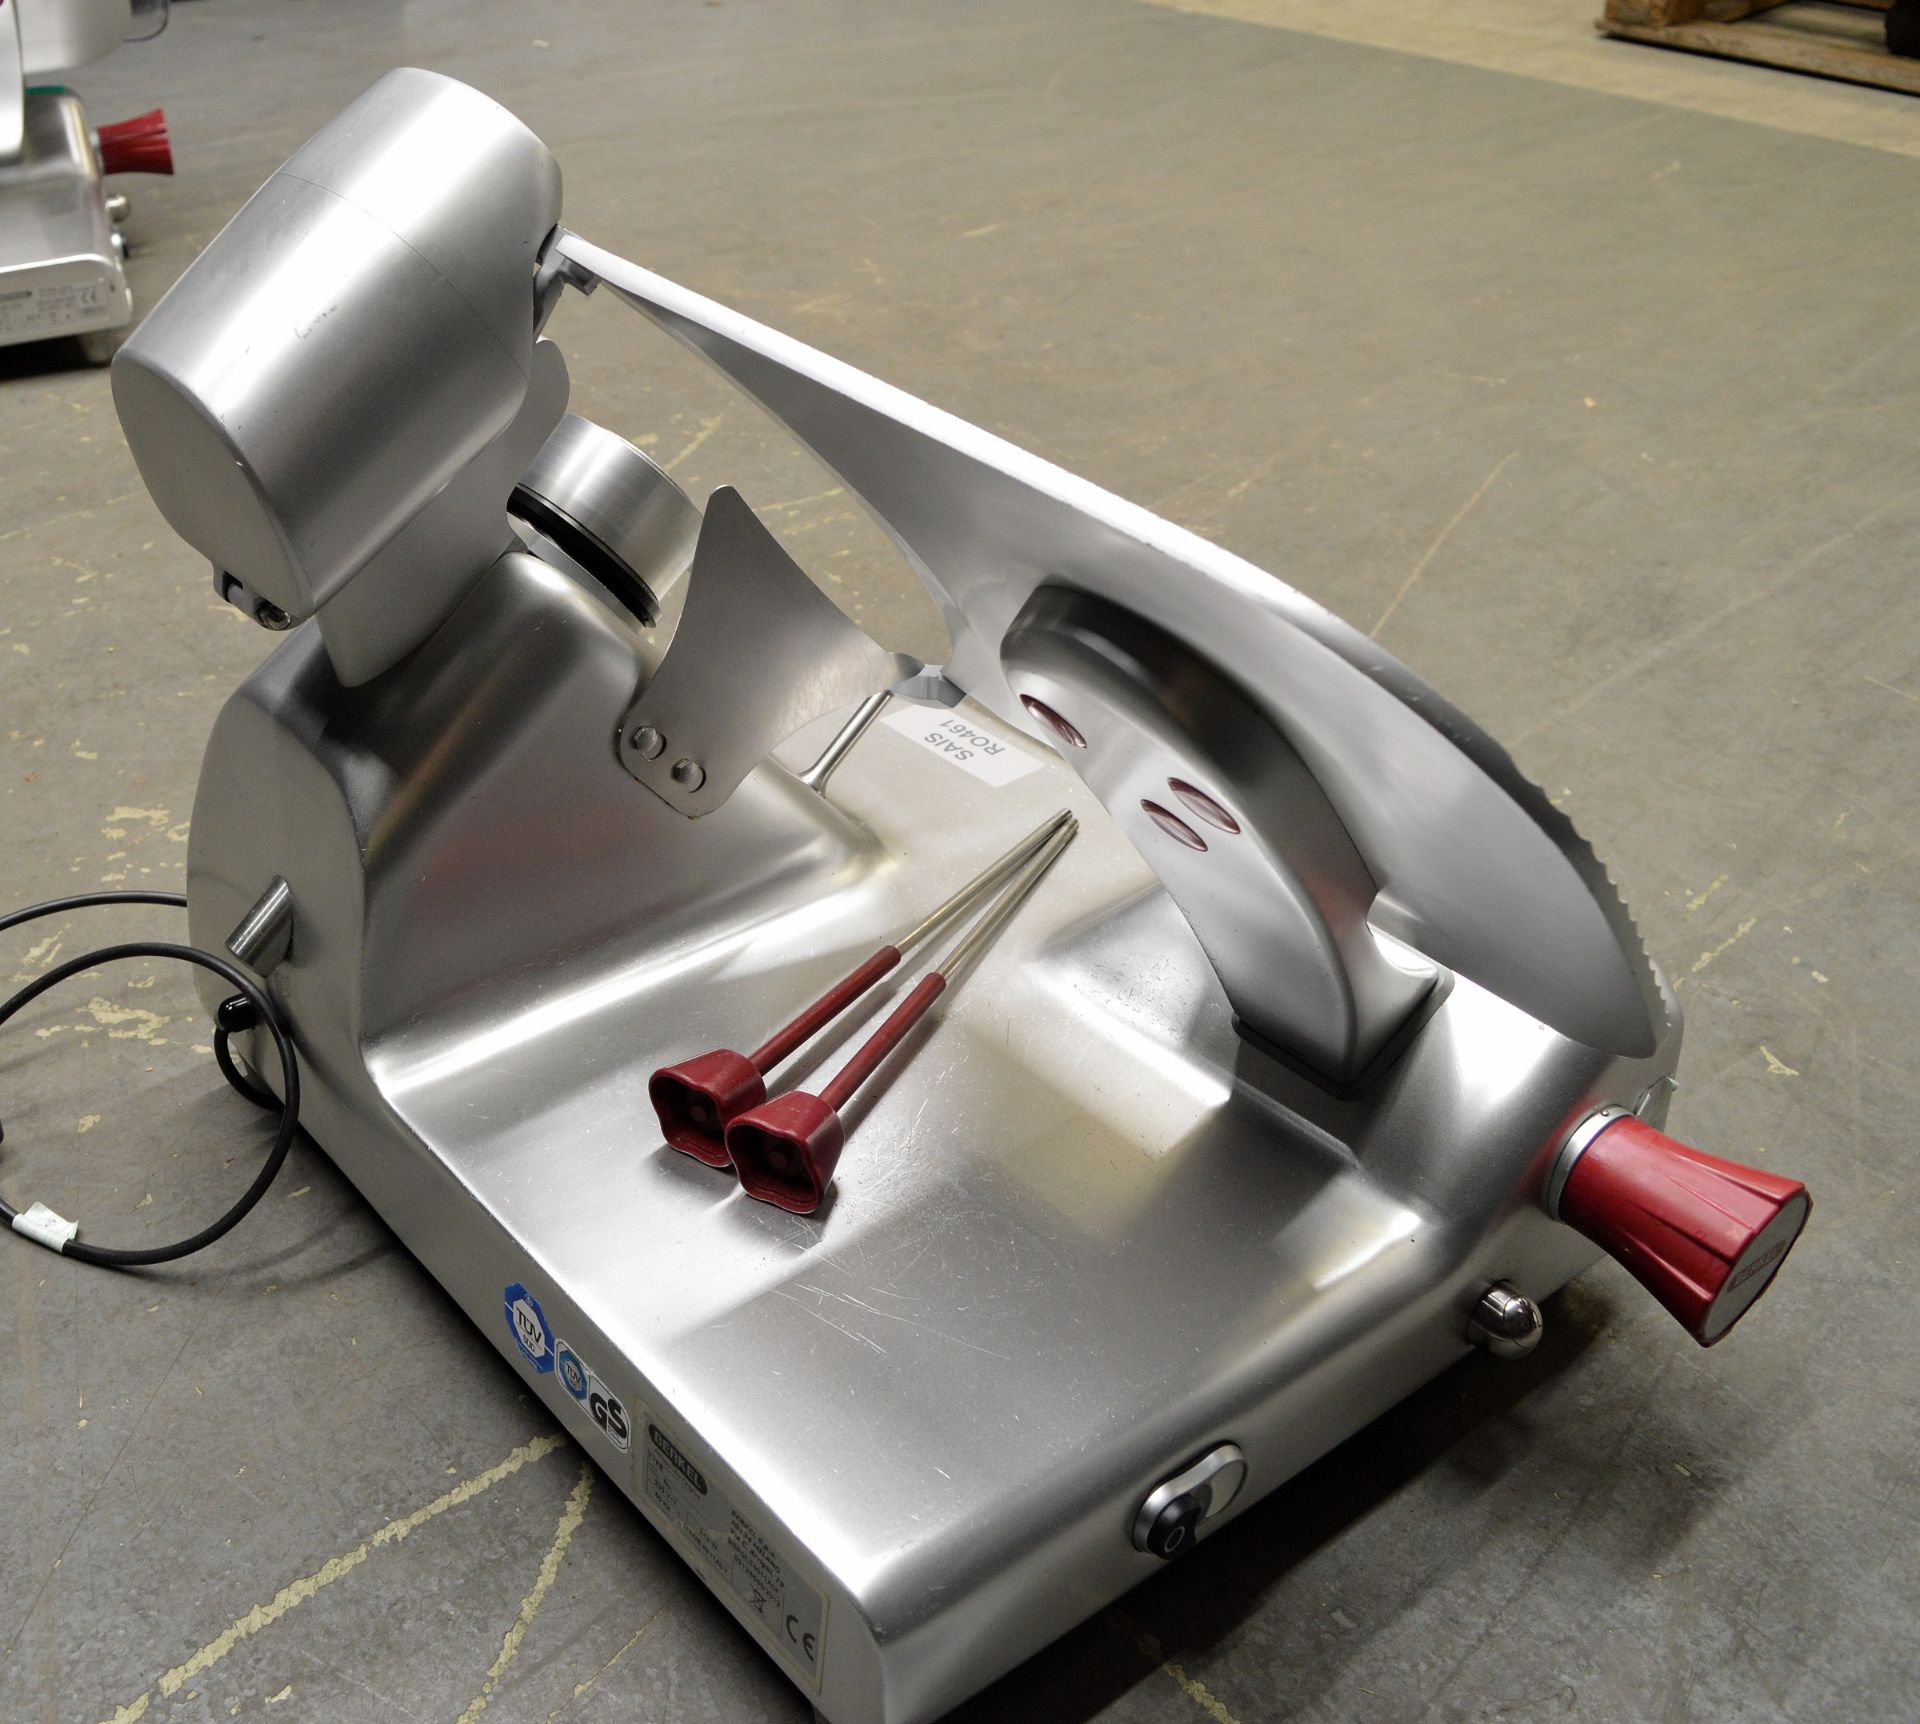 Berkel BSPGL04011A0F 12" Commercial Cooked Meat / Bacon Slicer, single phase electric - Image 5 of 7